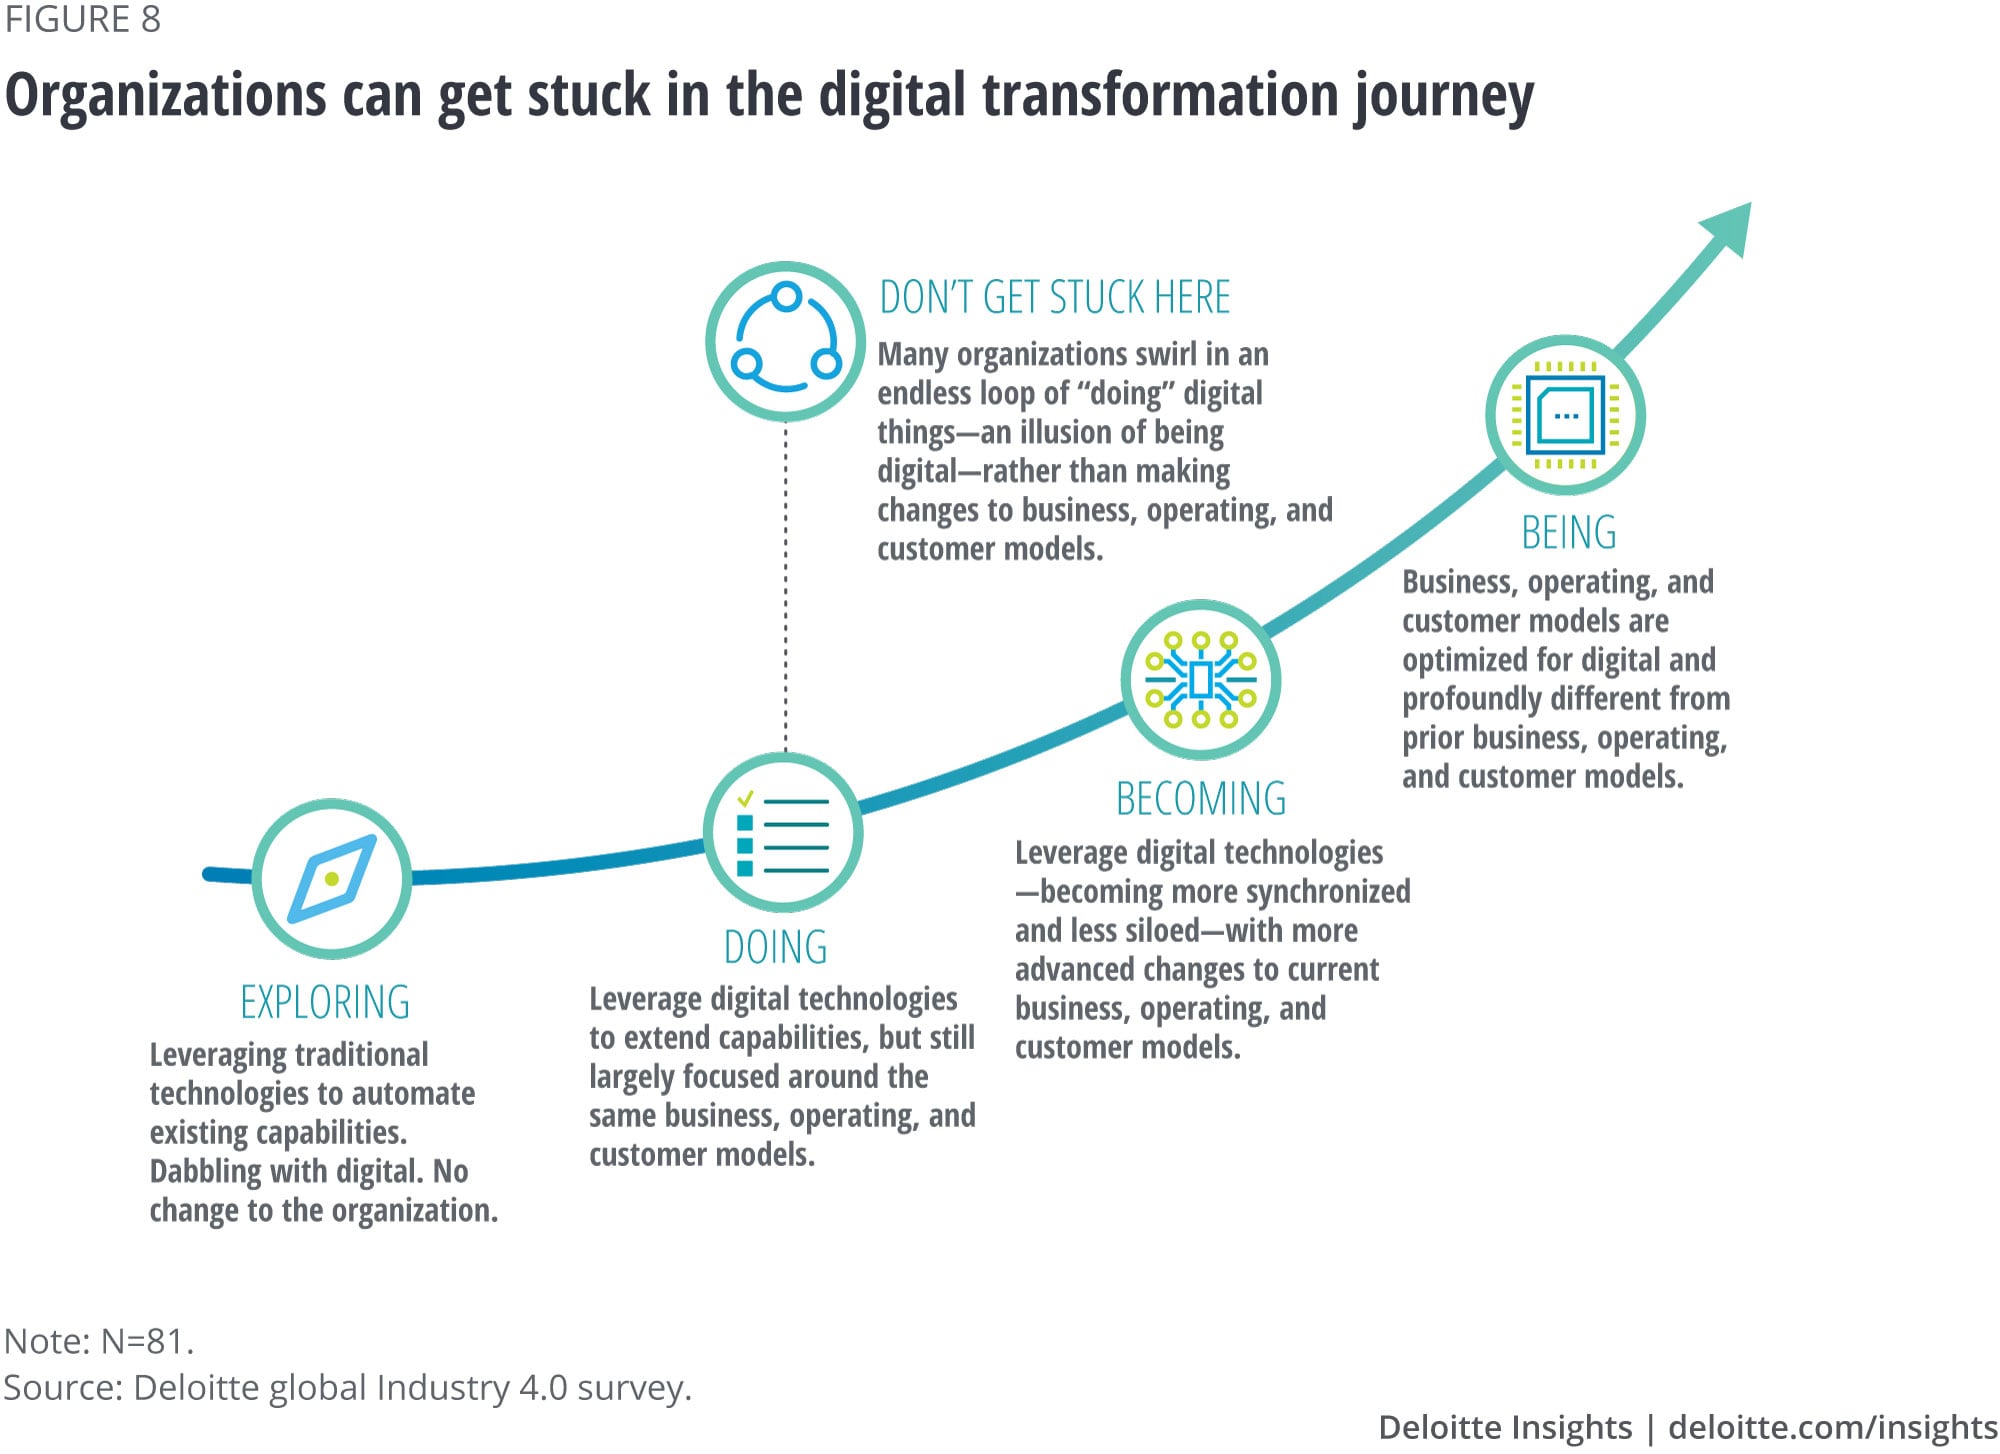 Organizations can get stuck in the digital transformation journey